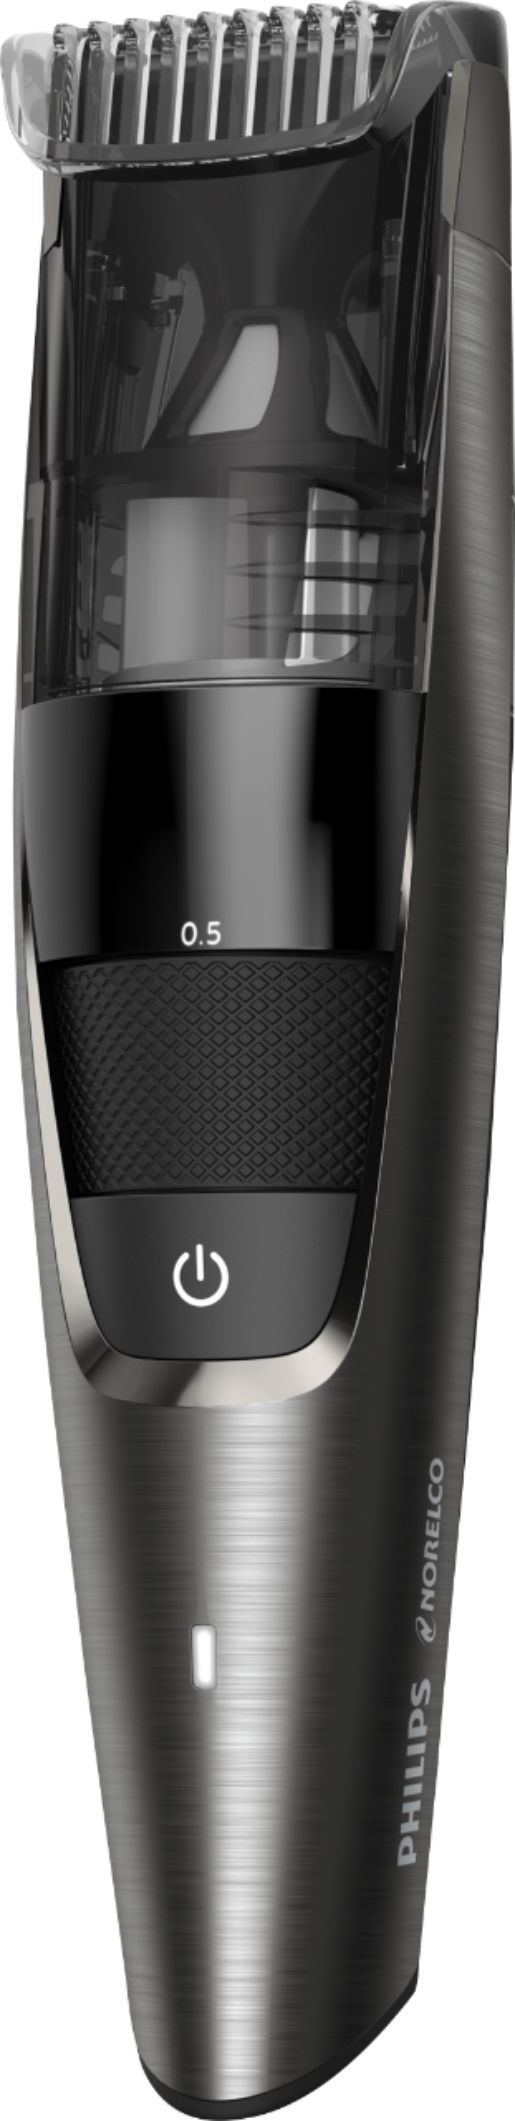 Left View: Philips Norelco - 7000 Series Hair Trimmer - Gray/Black